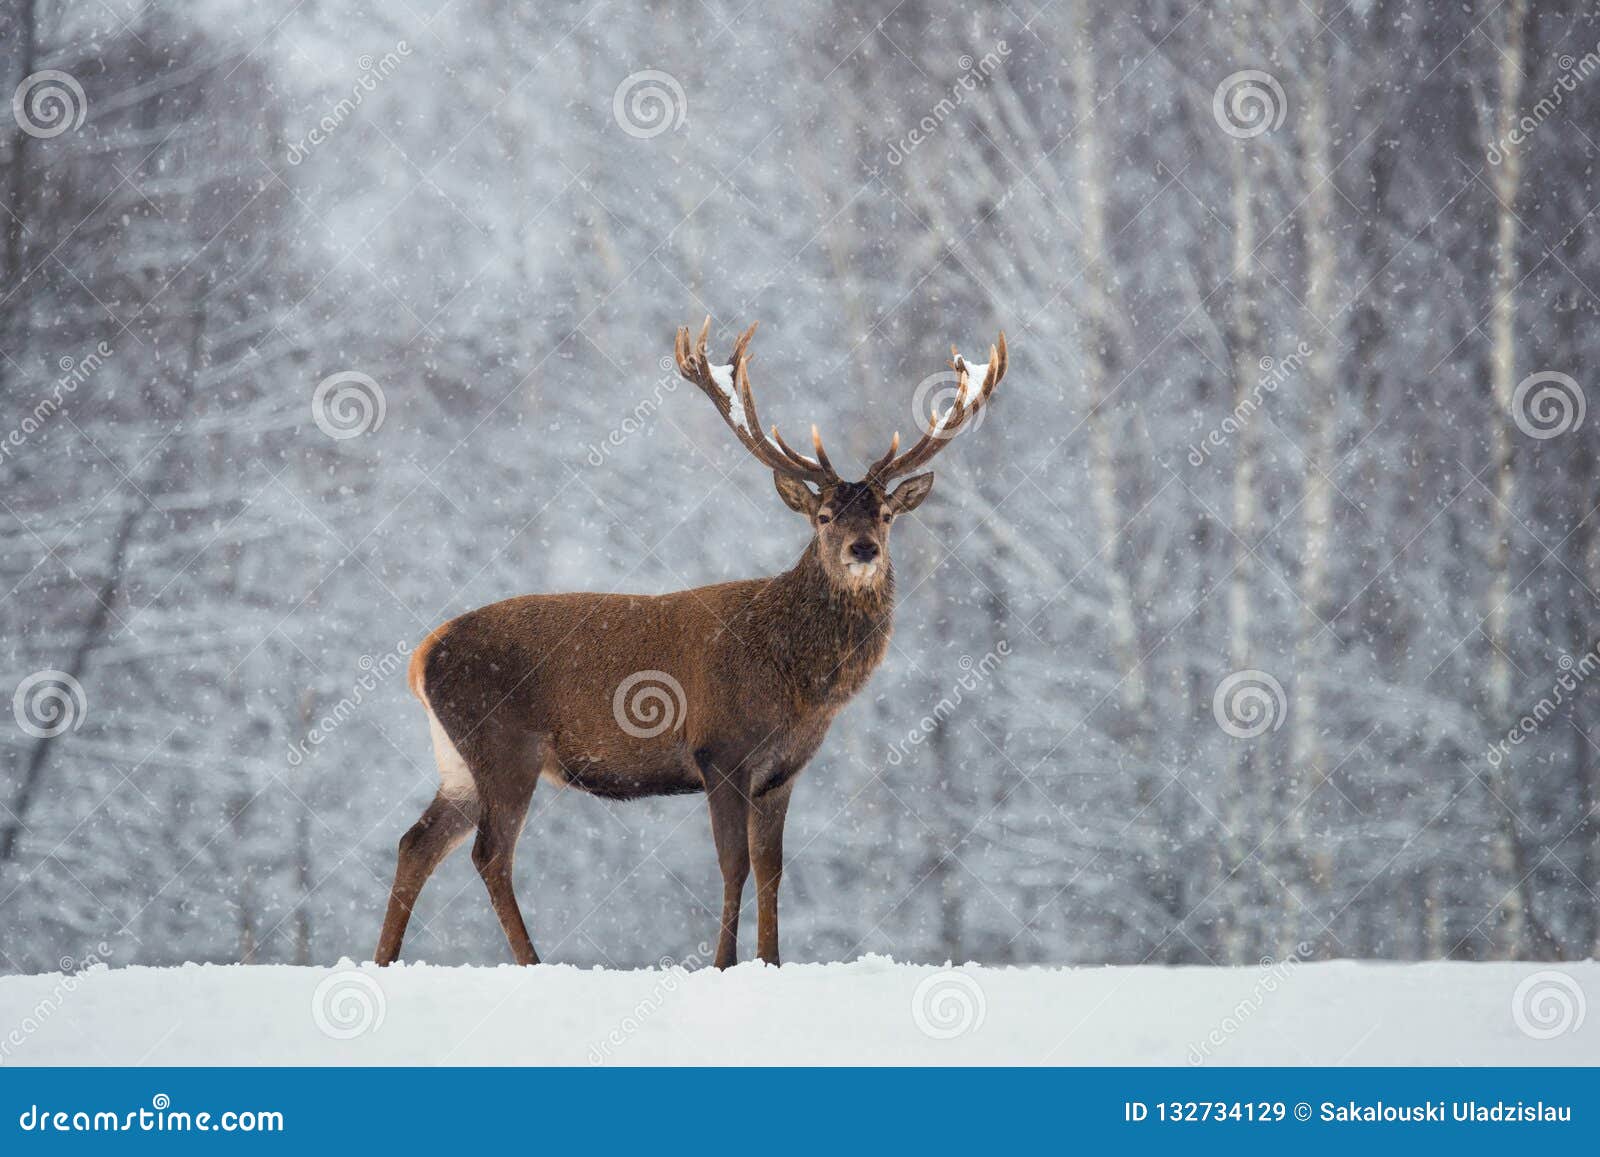 christmas scenic wildlife landscape with red noble deer and falling snowflakes.adult deer cervus elaphus, cervidae with snow-co